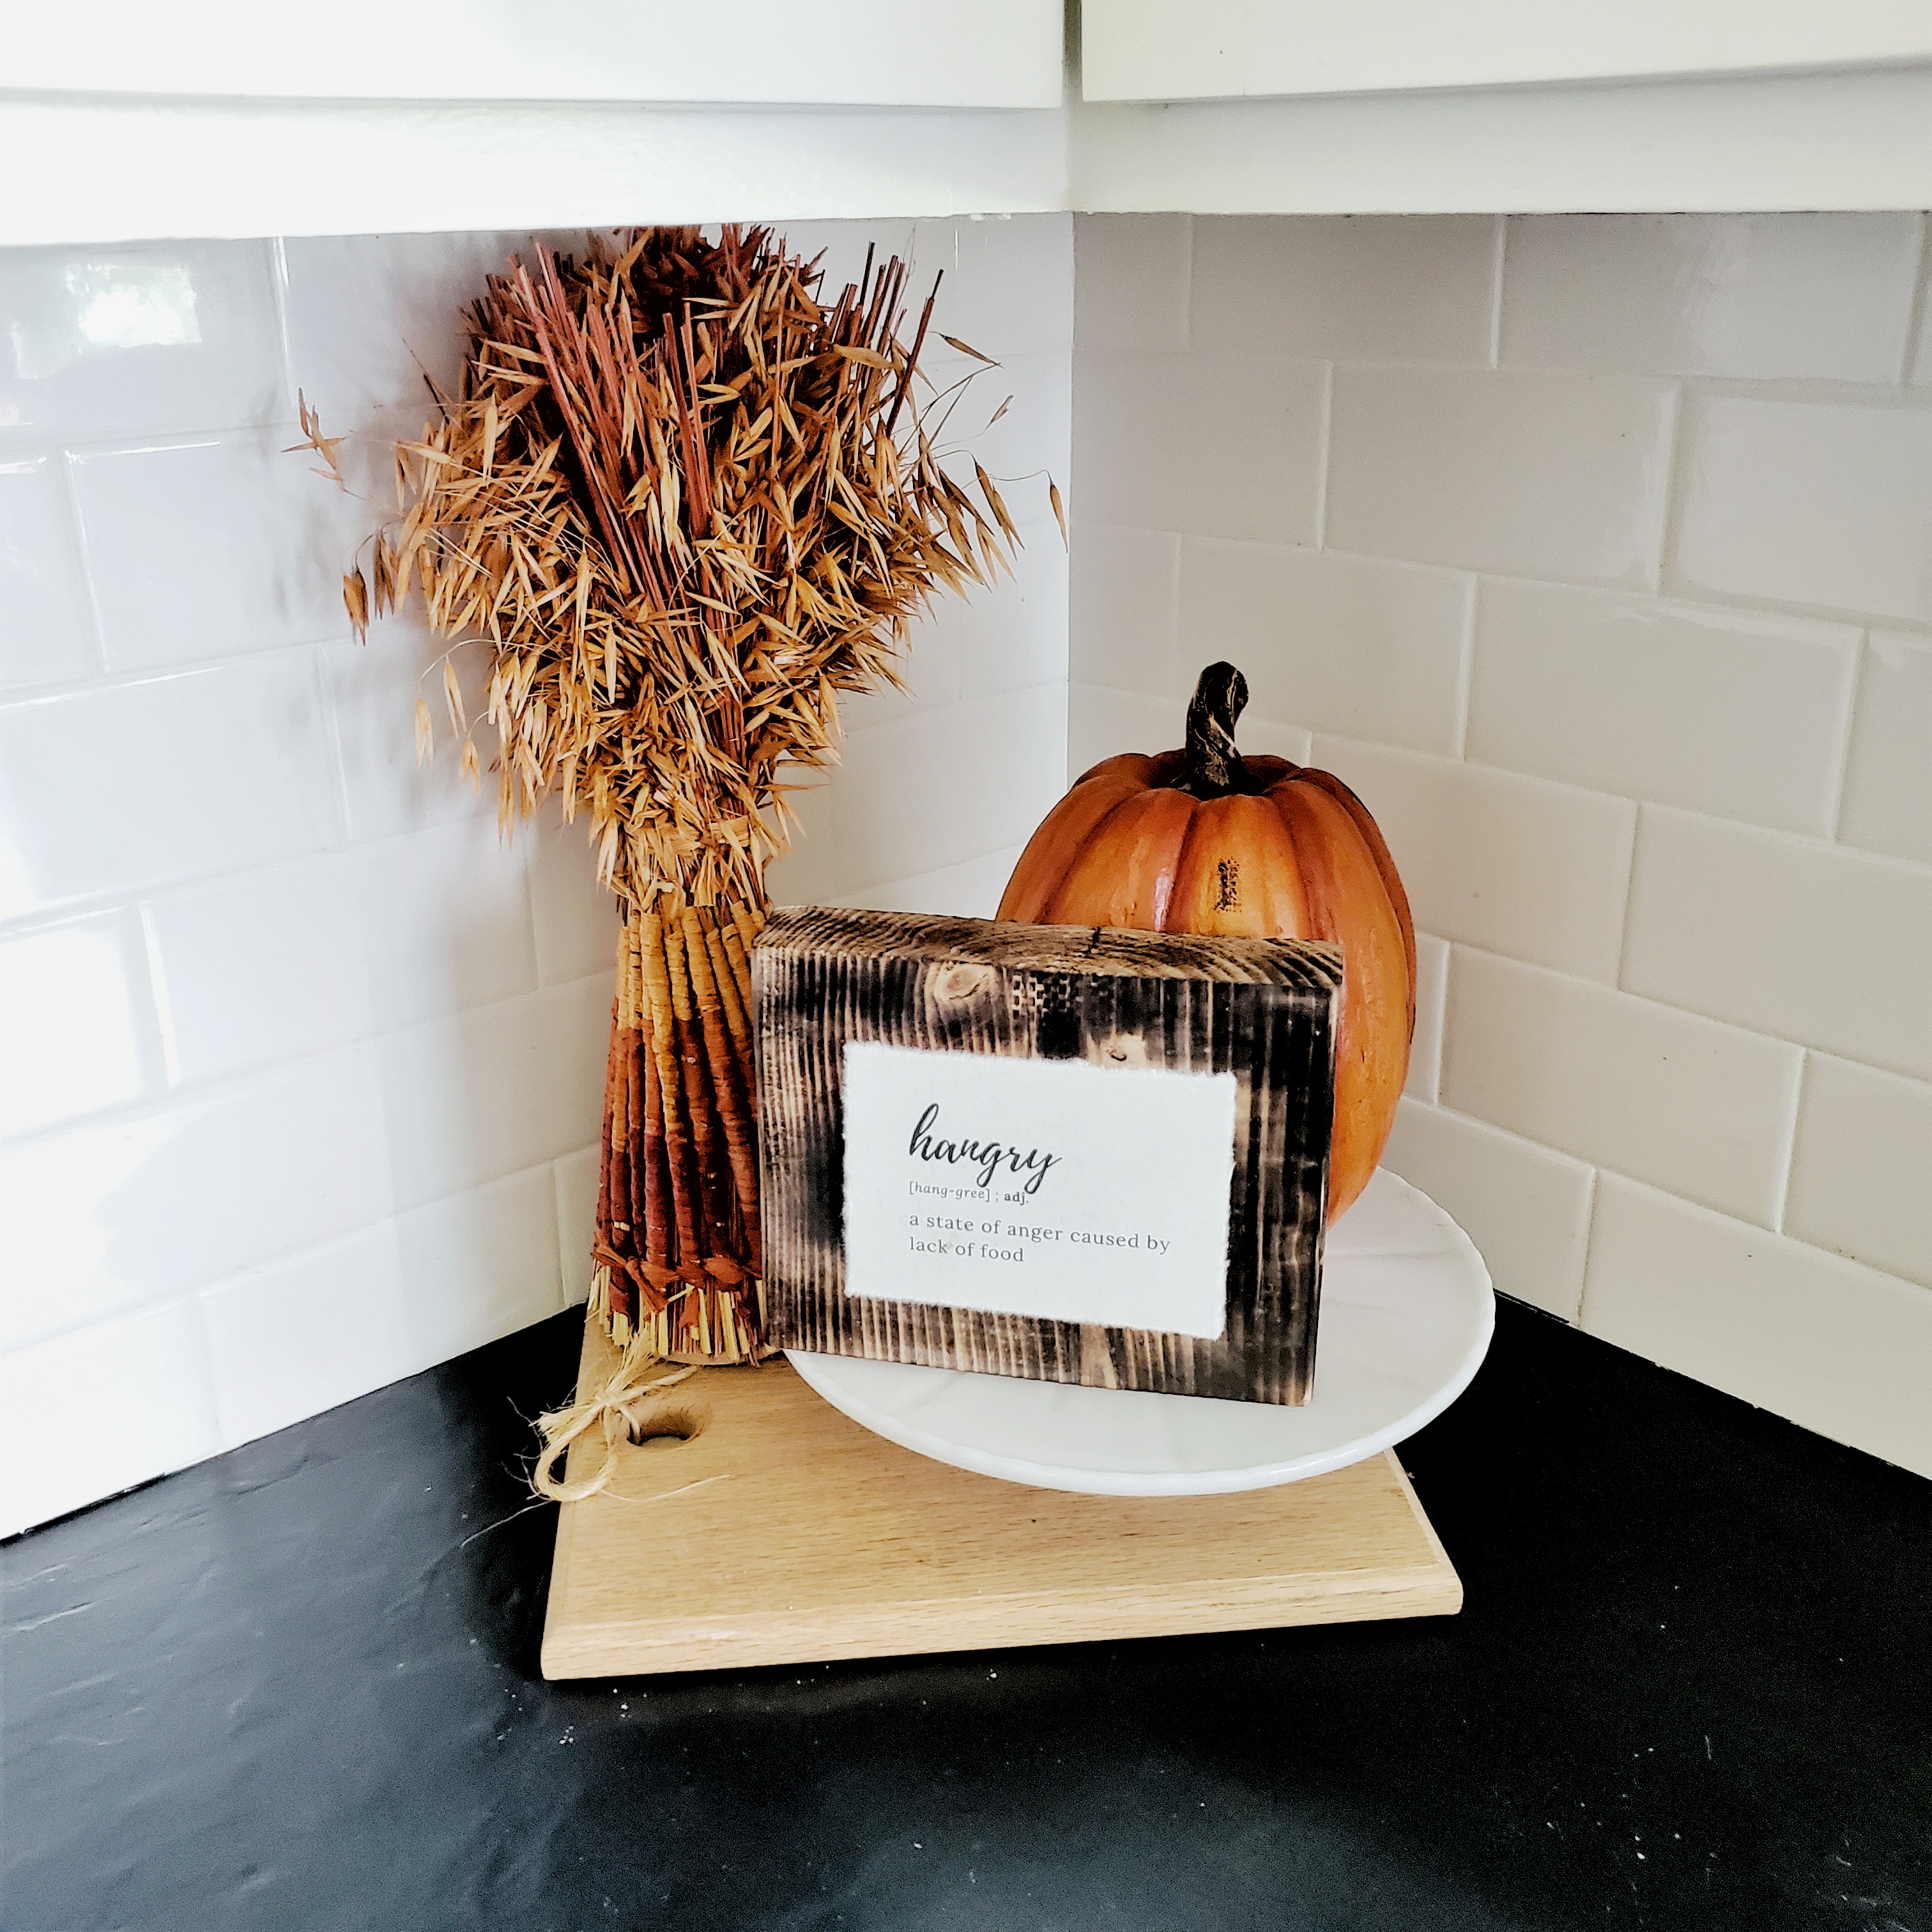 Hangry - the perfect sign for your kitchen.  Add a pumpkin and some seasonal grass on layered trays and containers for the perfect display.